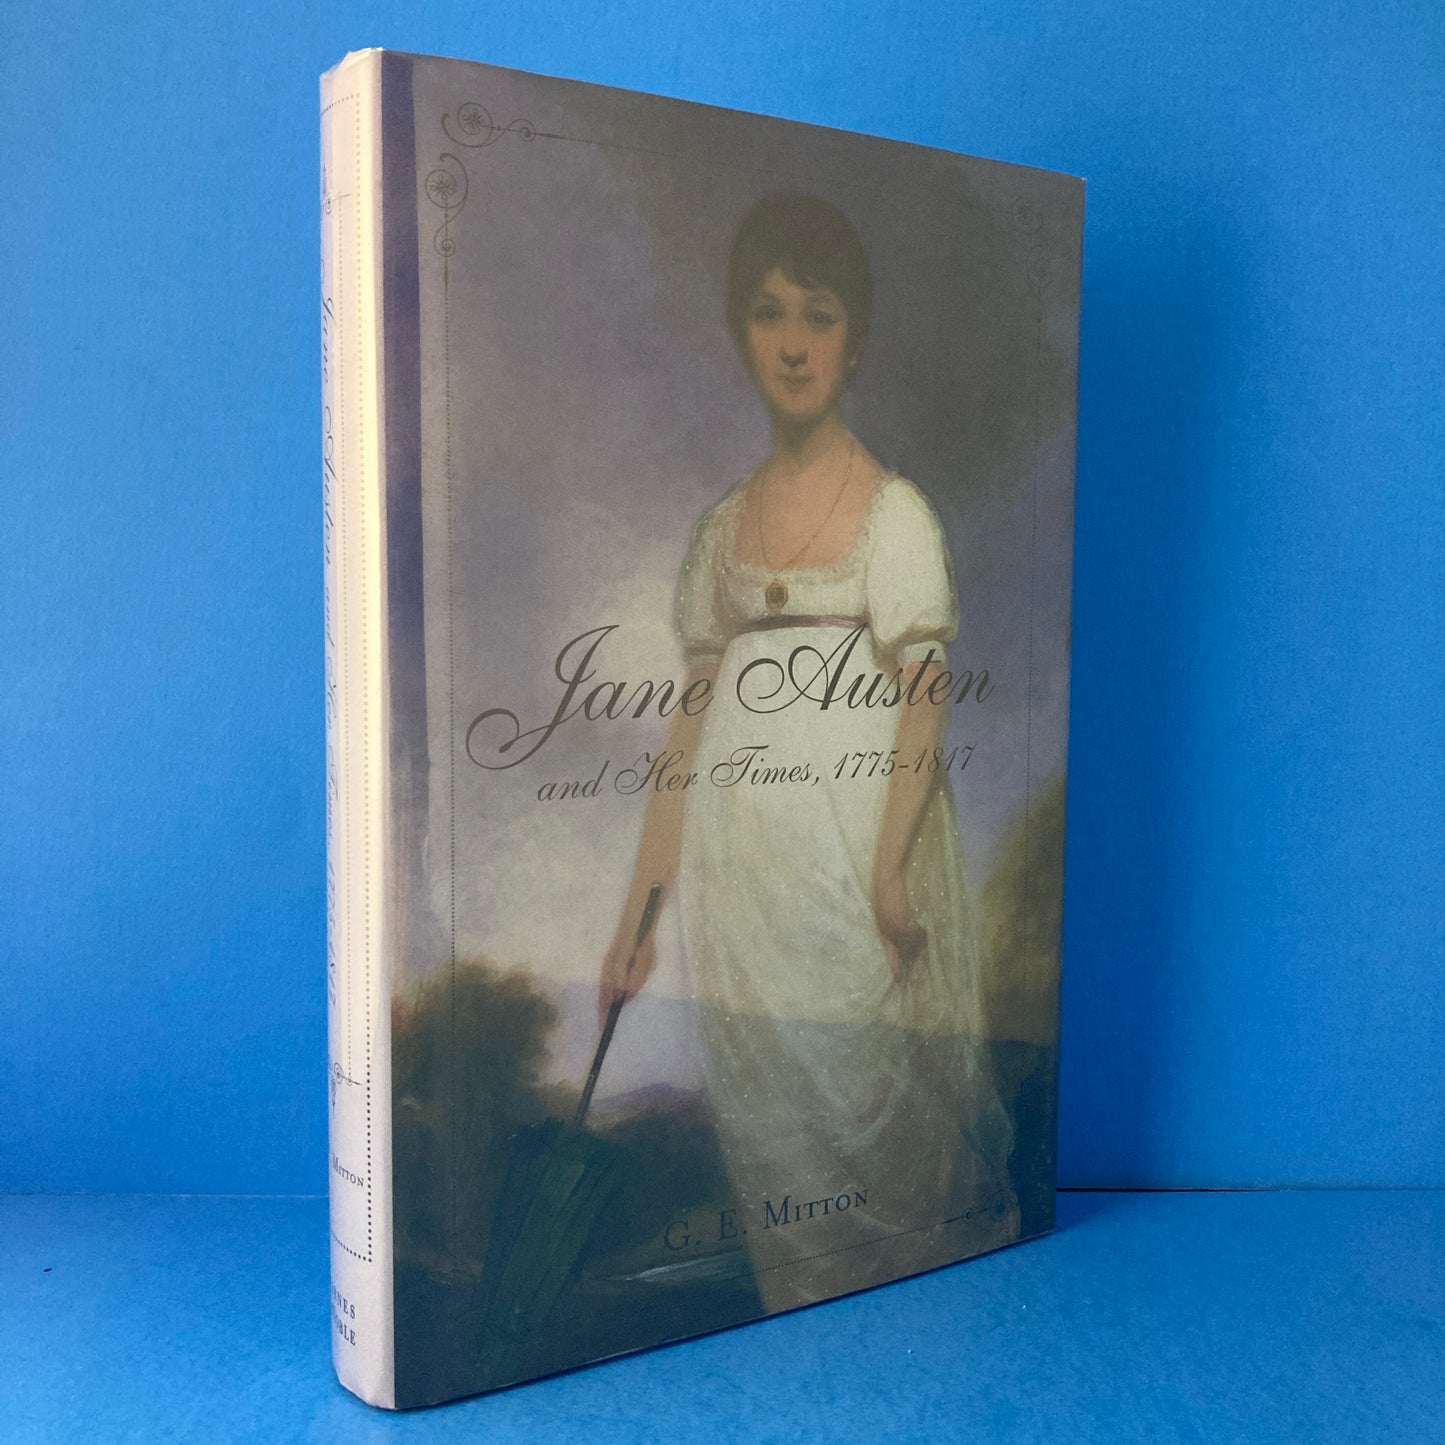 Jane Austen and Her Times, 1775-1817